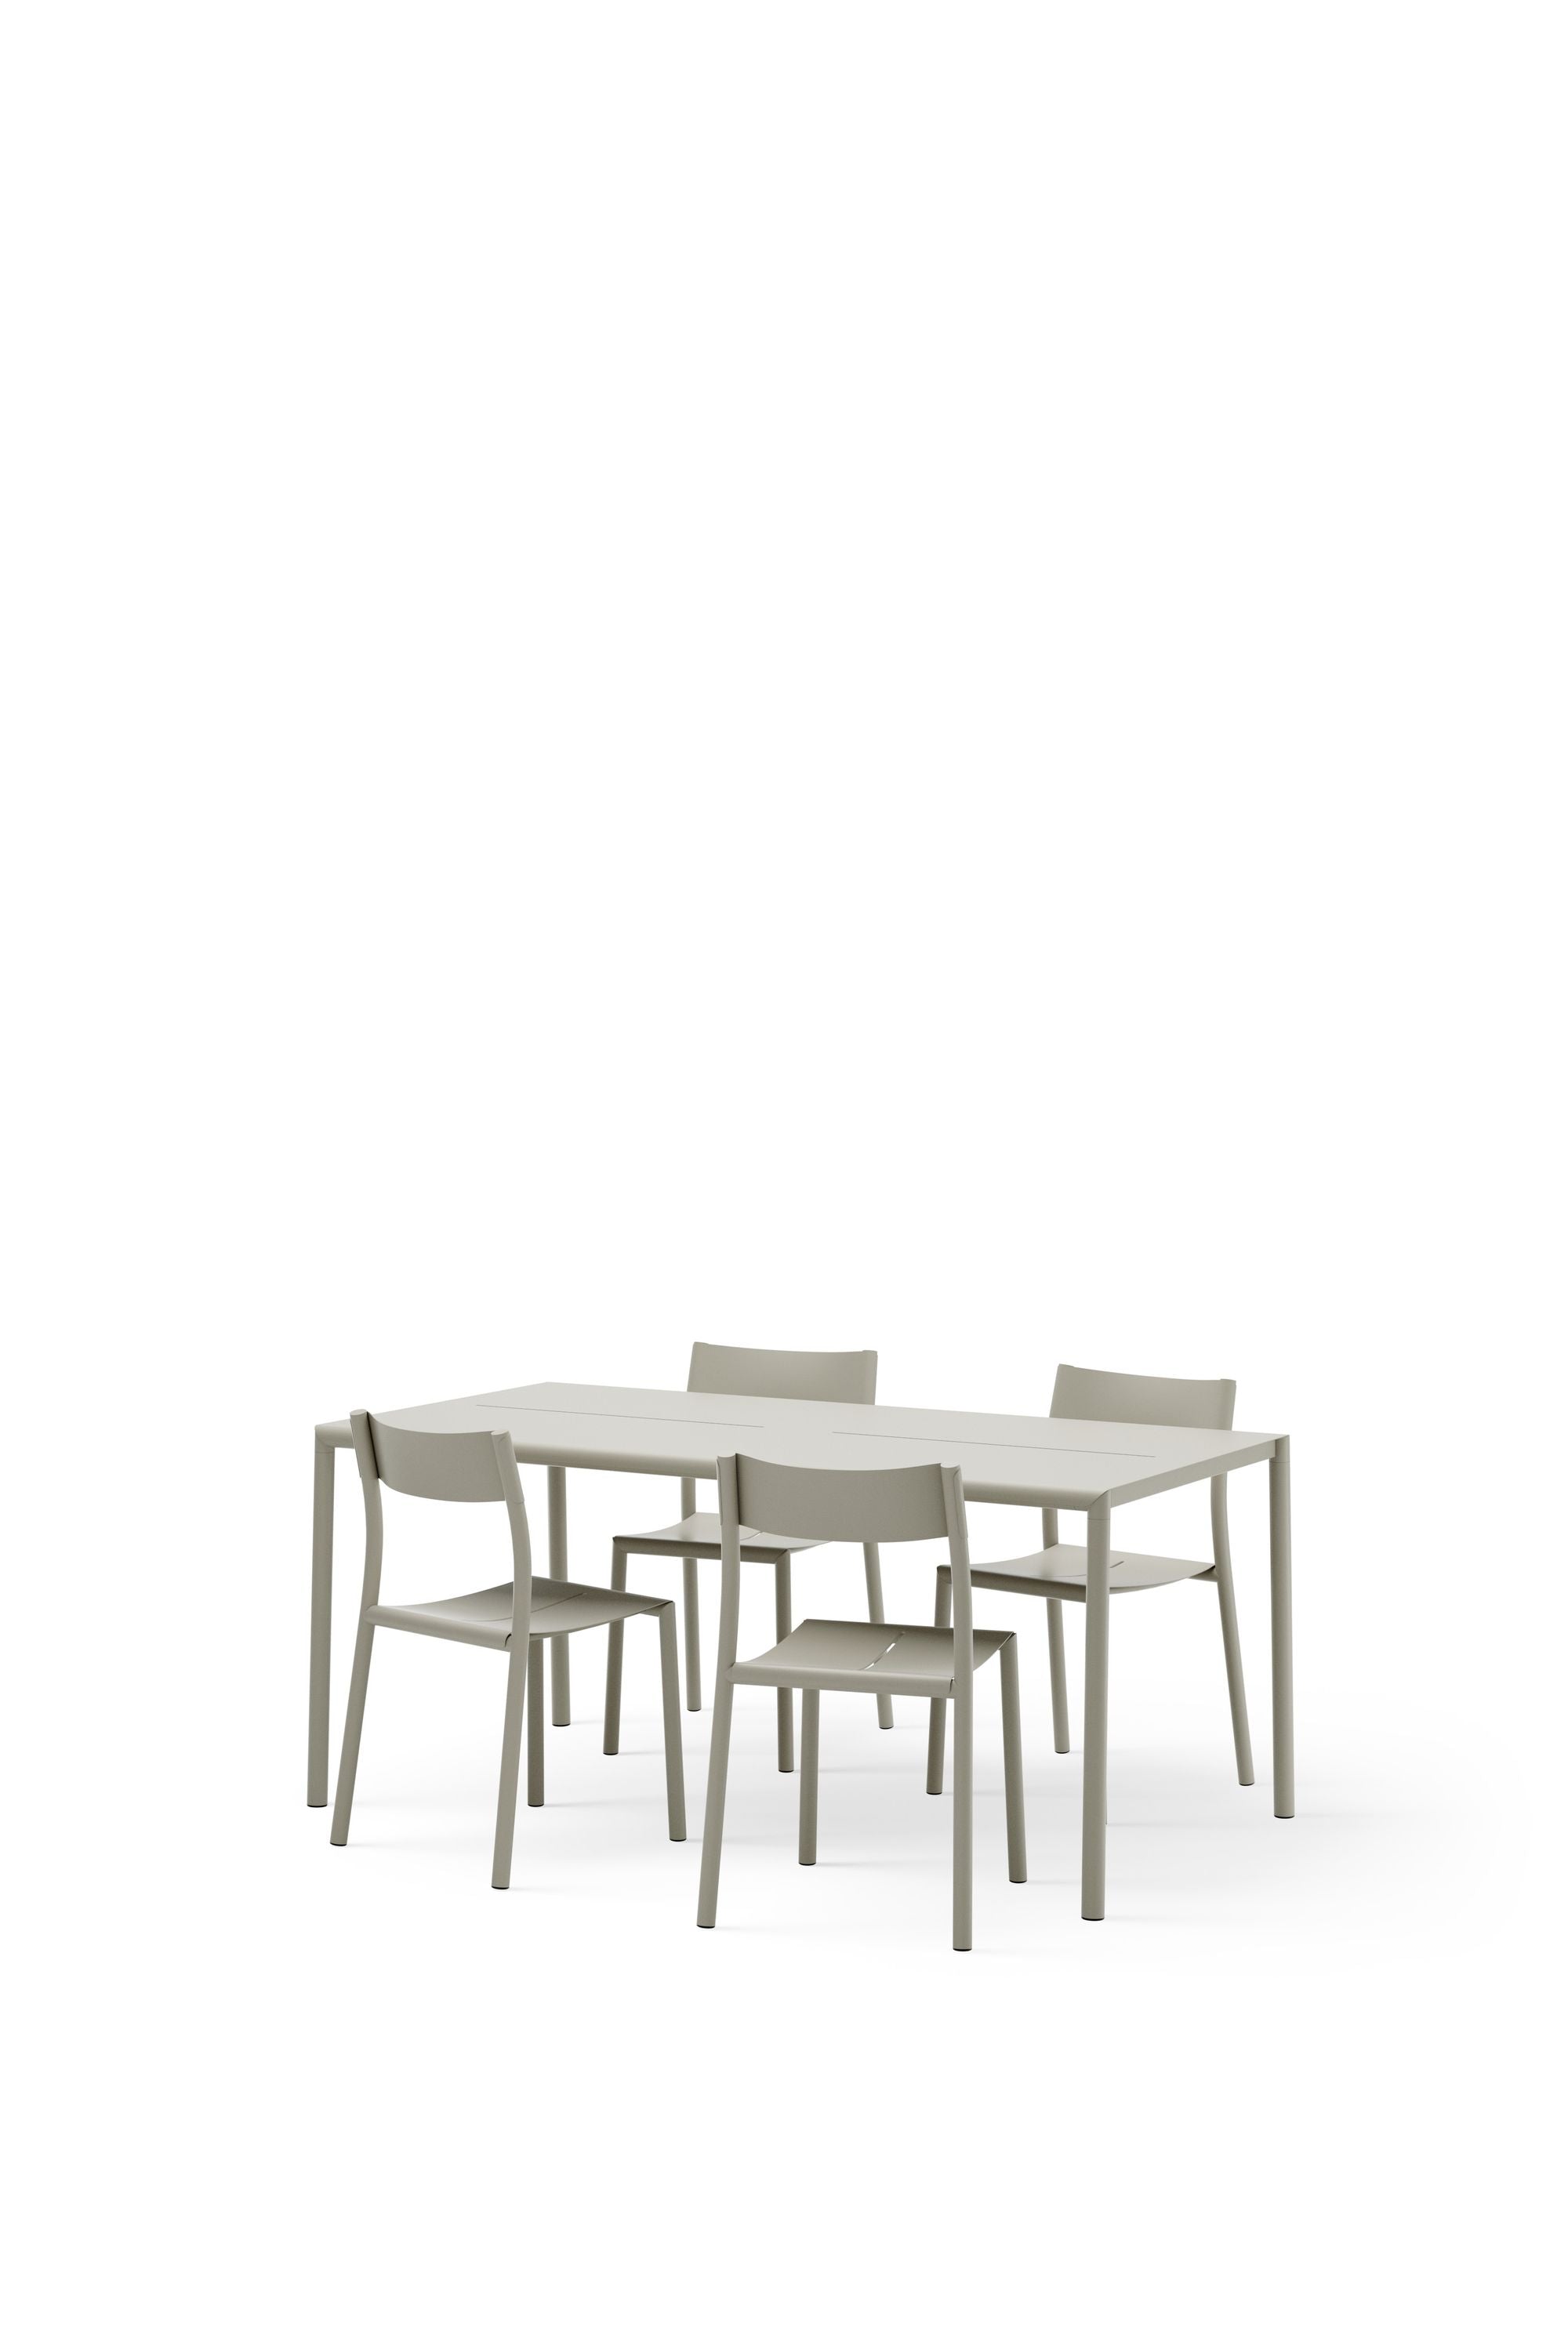 New Works May Table 170 Cm, Light Grey